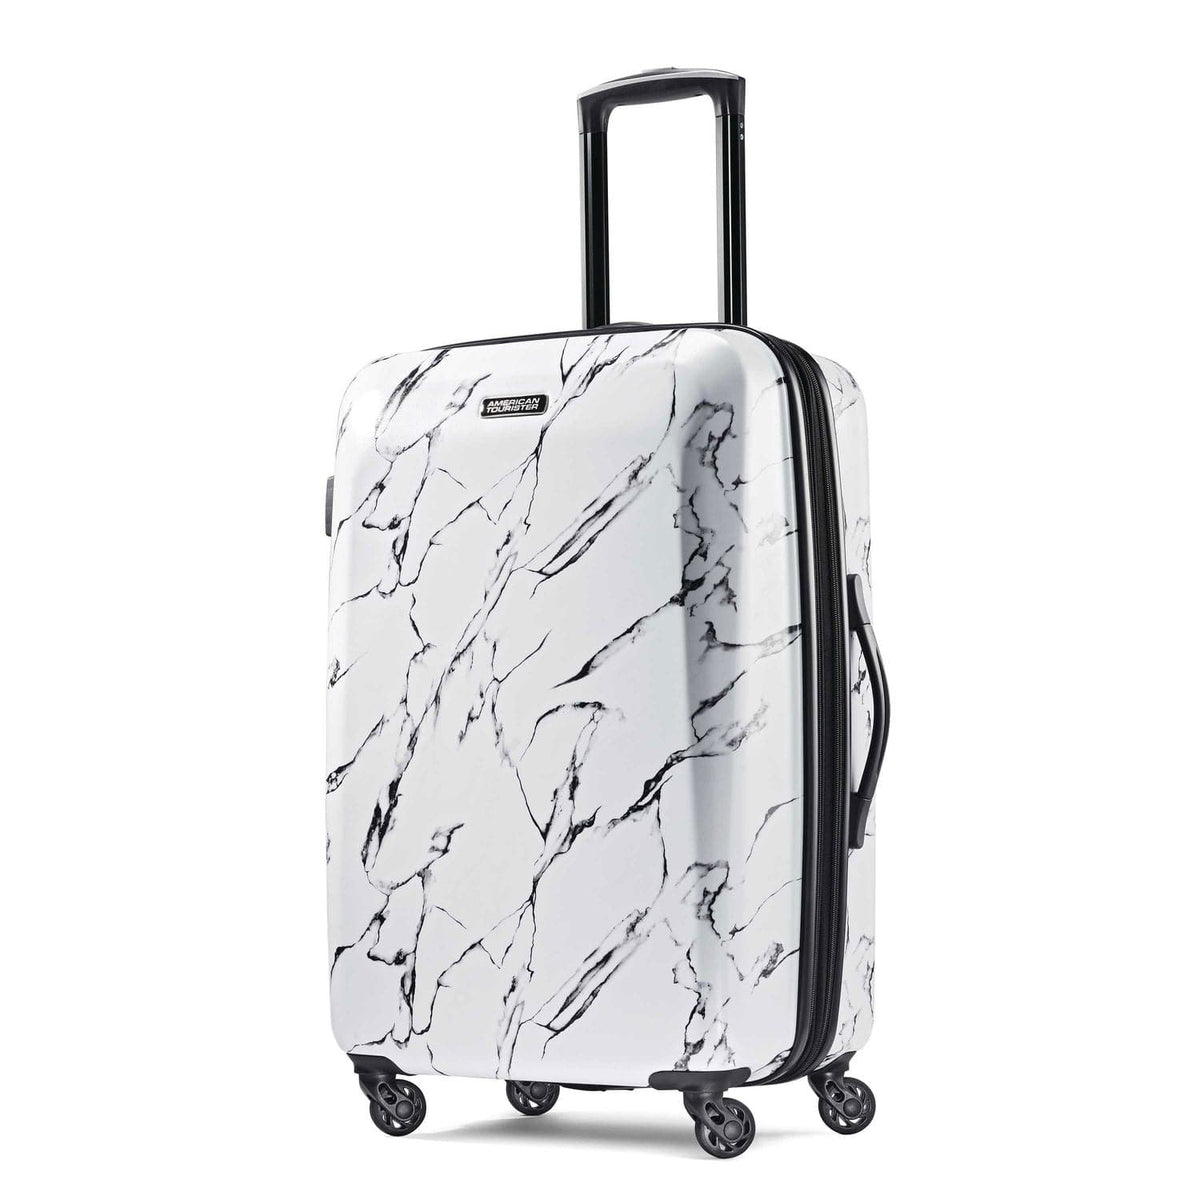 American Tourister Moonlight 25 Spinner Luggage Marble